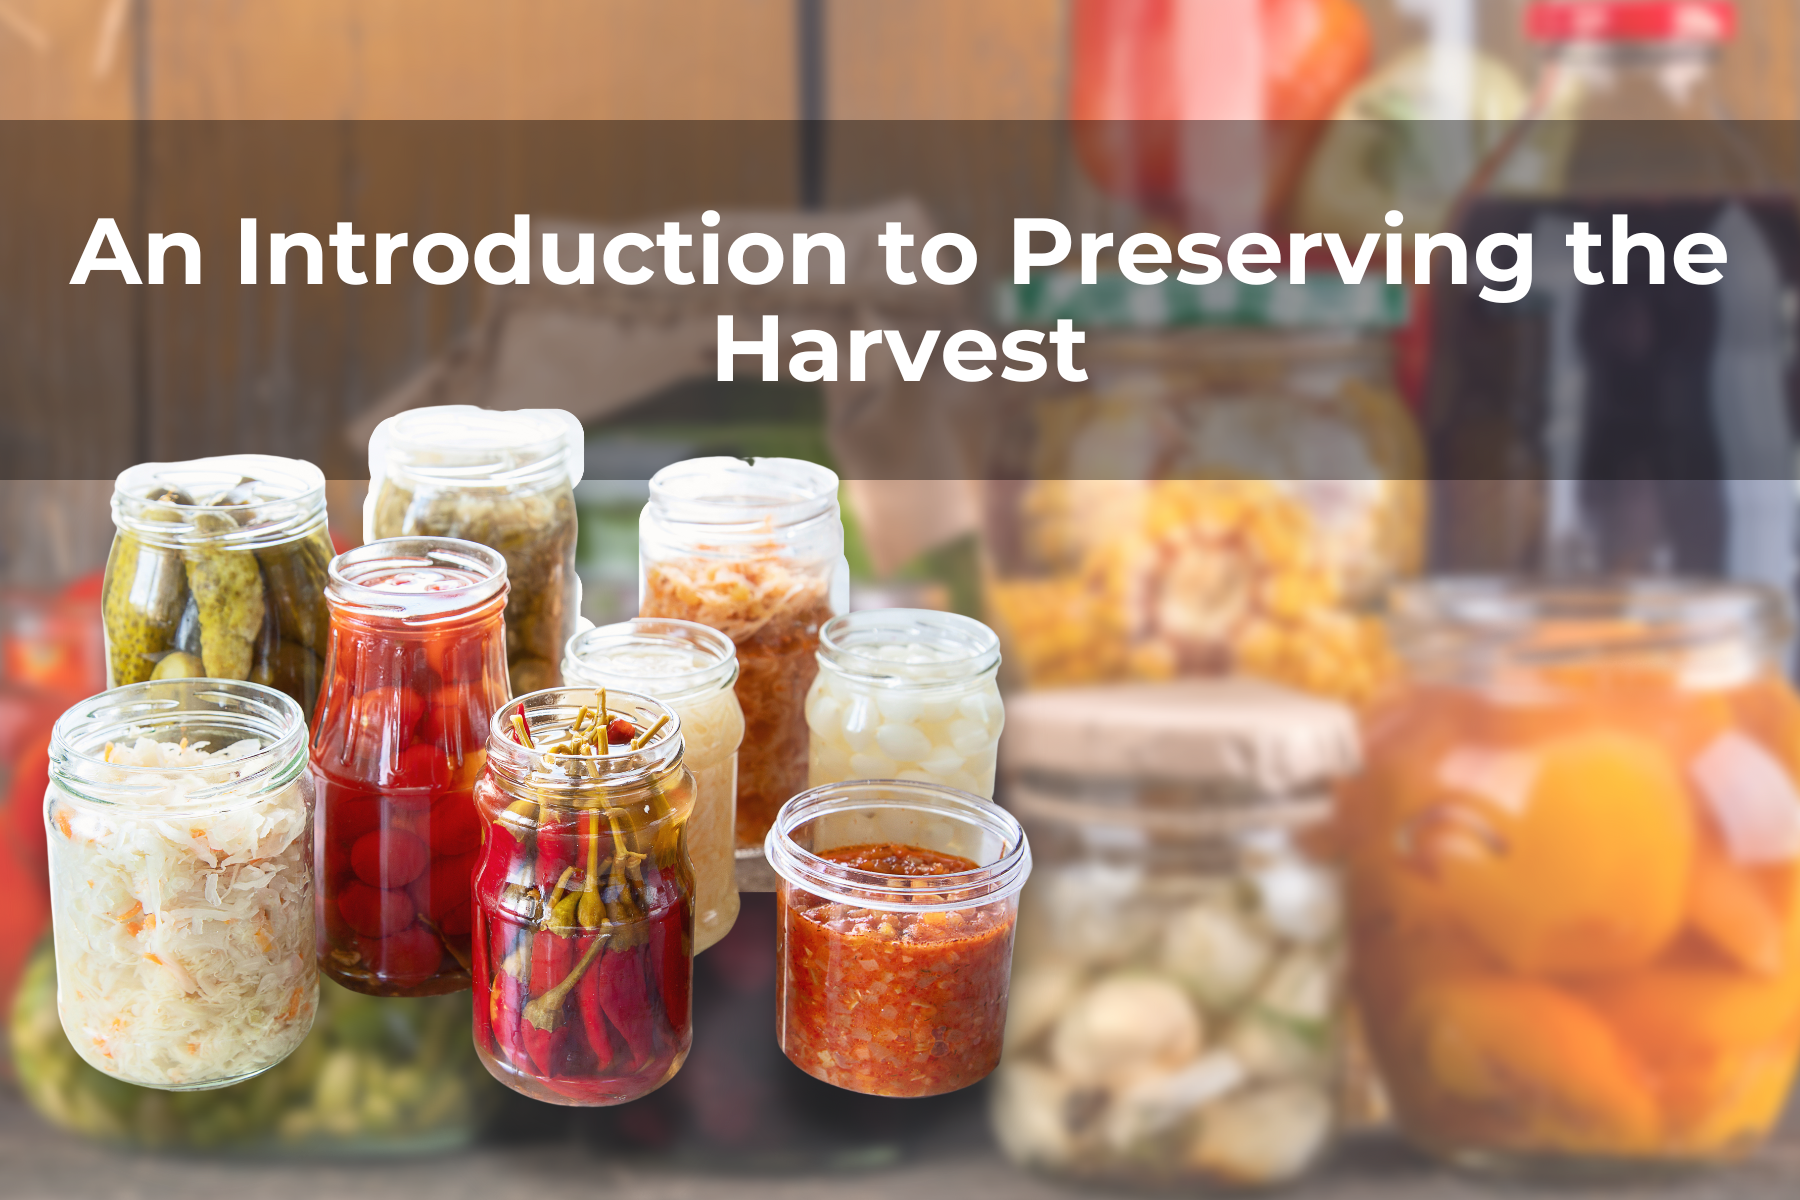 An Introduction to Preserving the Harvest